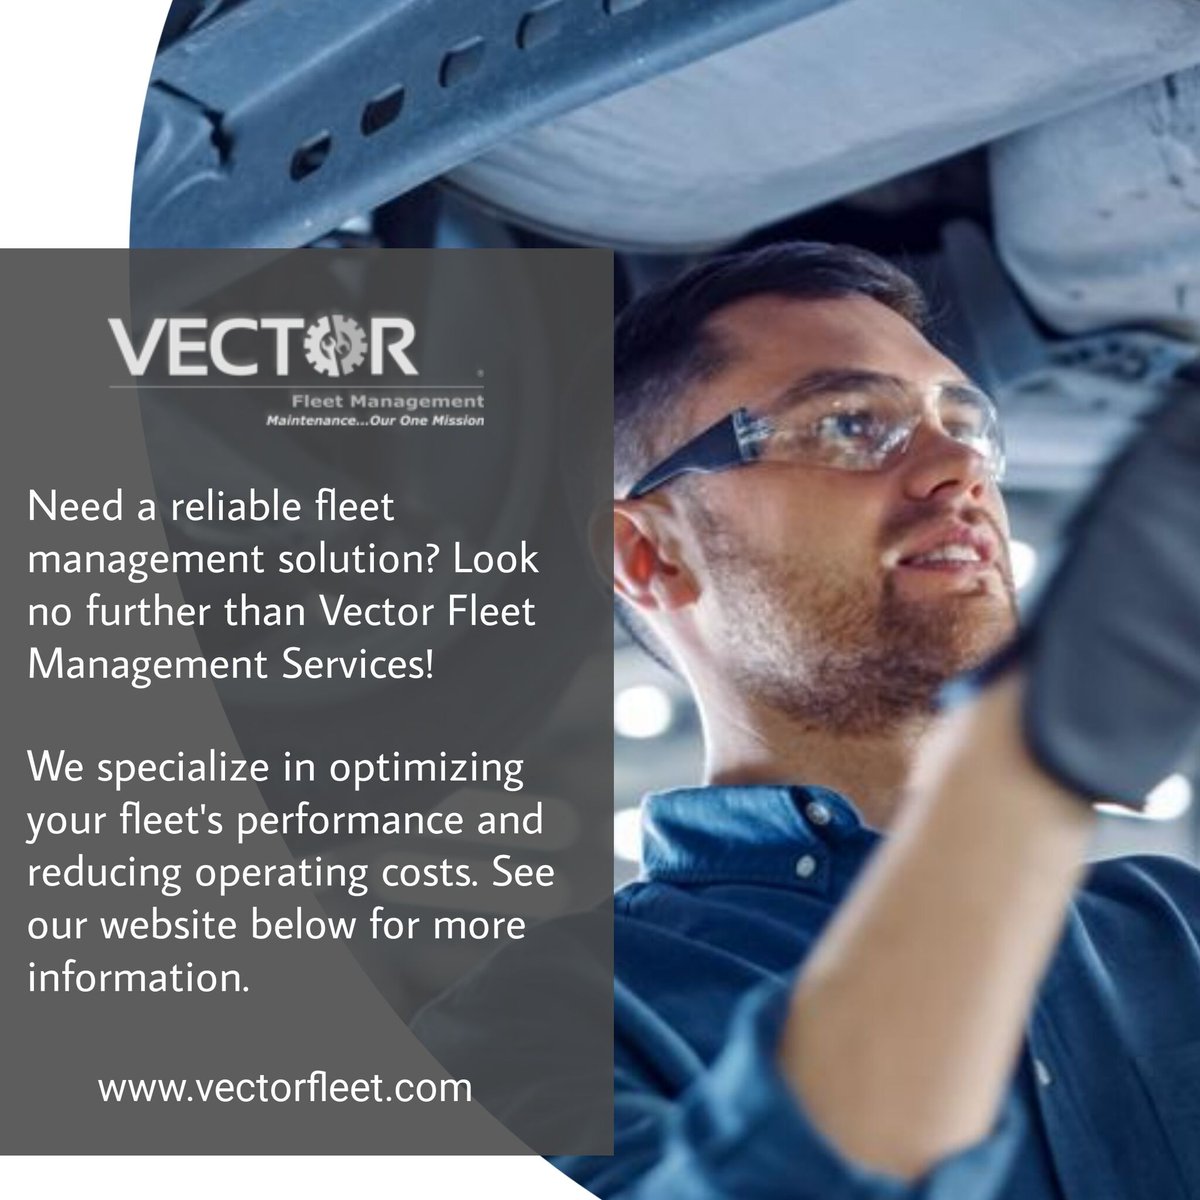 From routine maintenance and repairs to vehicle tracking and parts management, our team of experts is dedicated to keeping your fleet running smoothly and efficiently. #fleet #reliablesolution #optimizeperformance #operatingcosts #contactustoday #reducingcosts #fleetoptimization